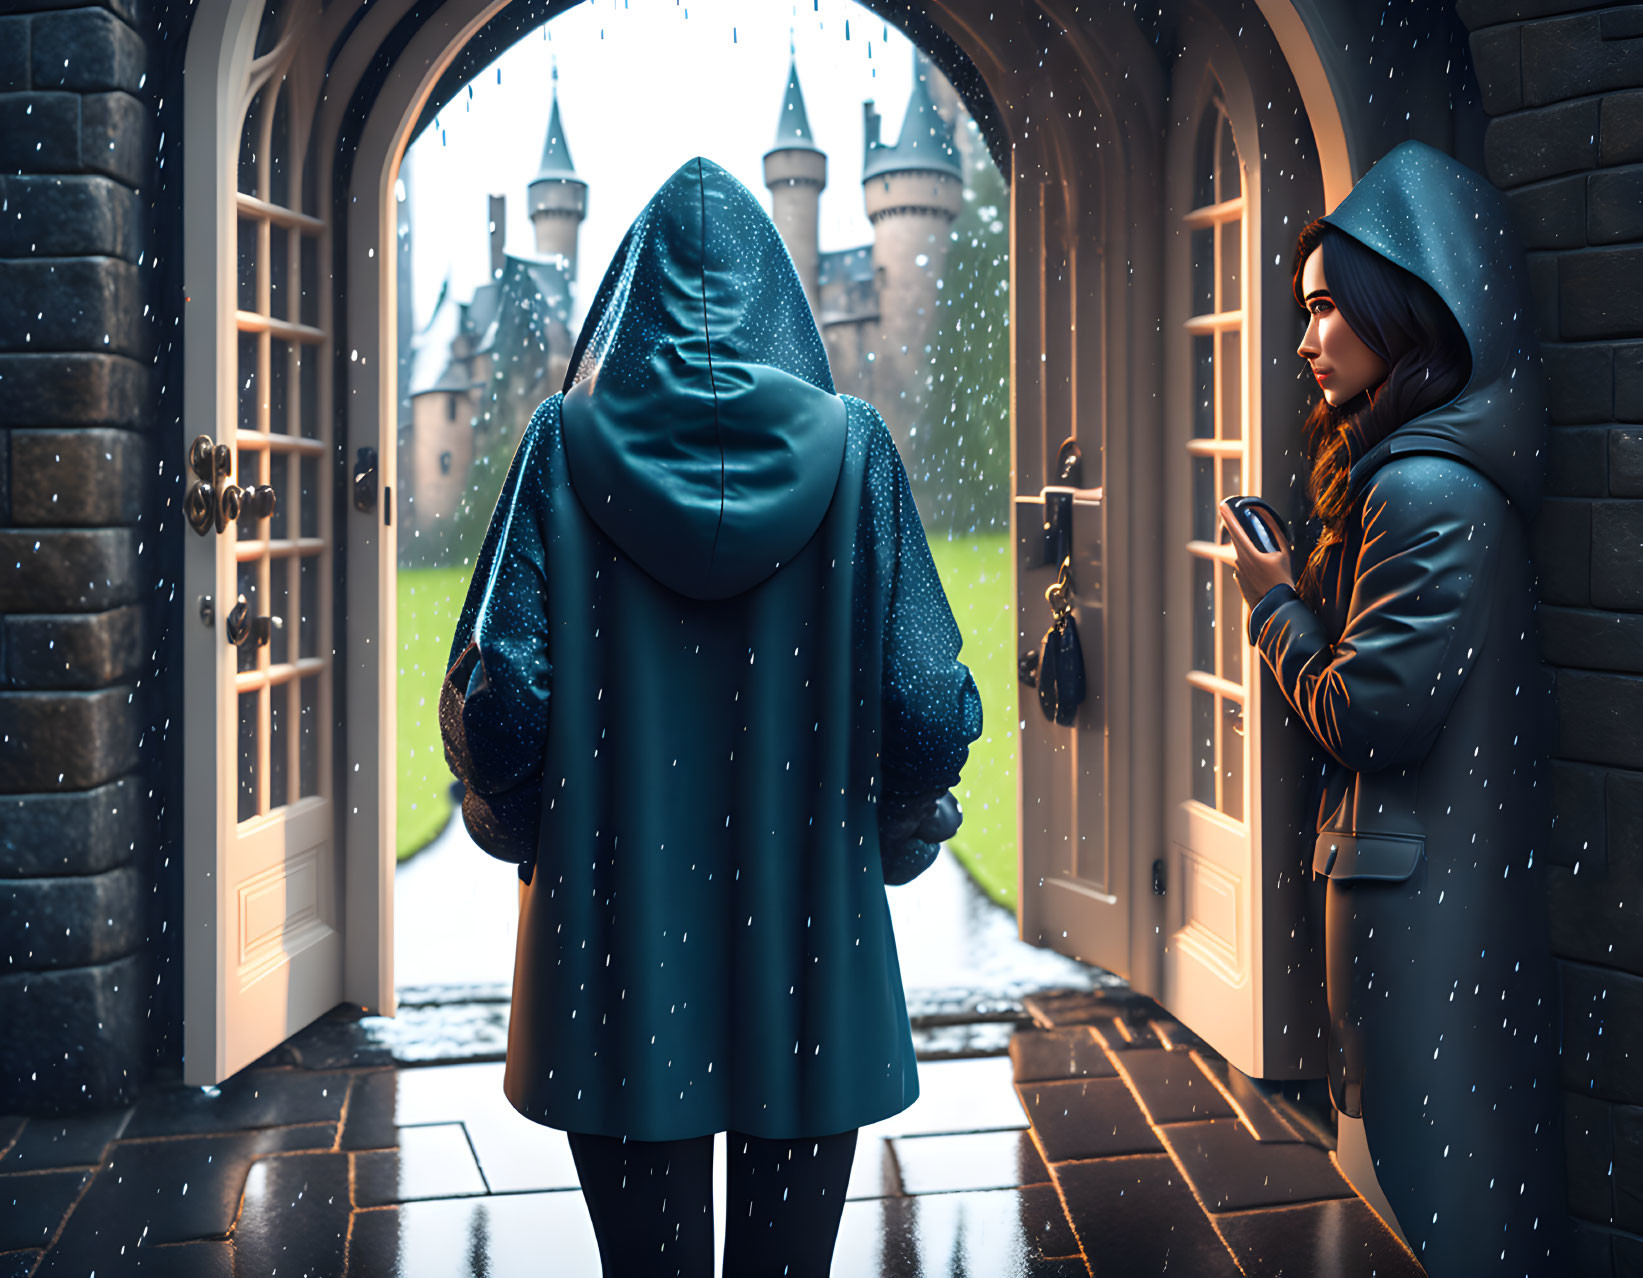 Cloaked Figure and Woman in Castle Doorway During Snowfall